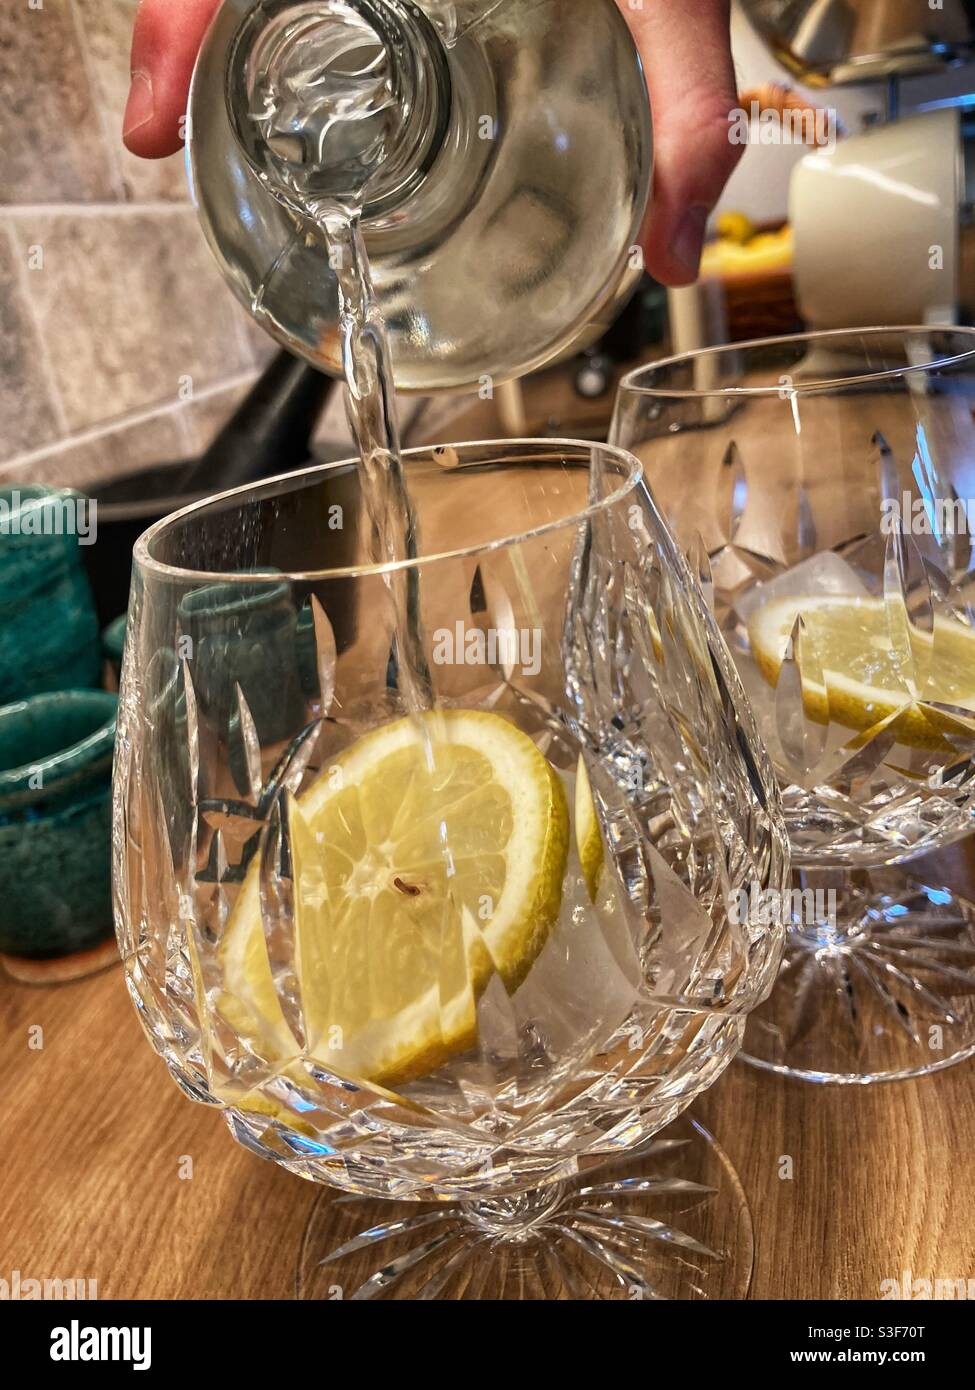 https://c8.alamy.com/comp/S3F70T/making-gin-and-tonic-filling-cut-glasses-with-lemon-slices-and-ice-cubes-in-with-gin-S3F70T.jpg